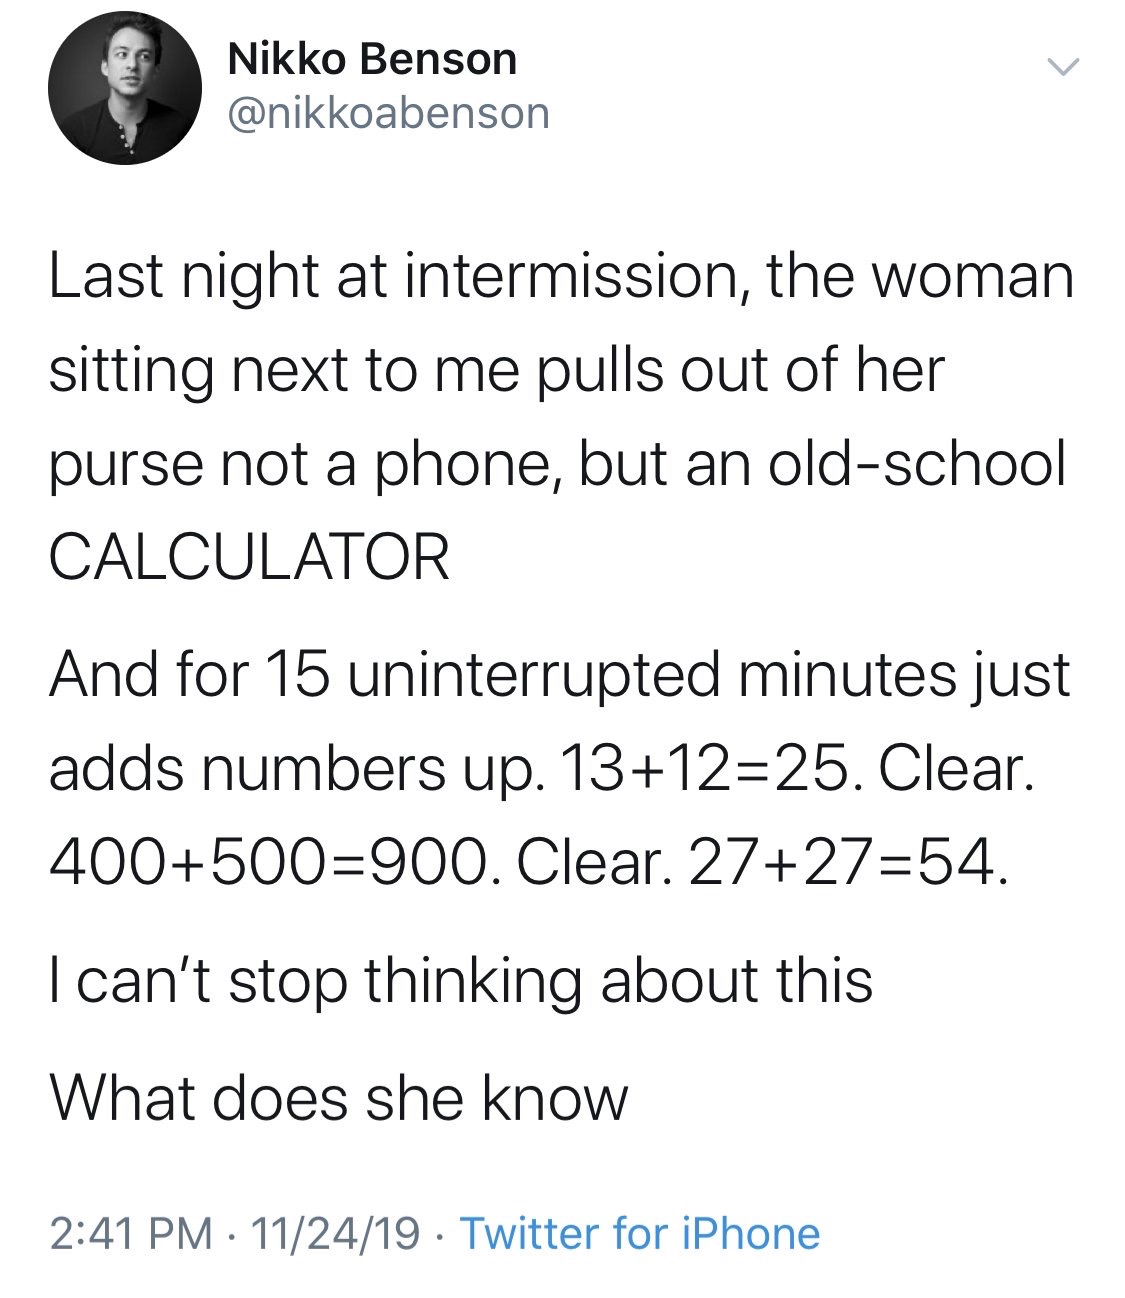 meme - desi punjabi memes - Nikko Benson Last night at intermission, the woman sitting next to me pulls out of her purse not a phone, but an oldschool Calculator And for 15 uninterrupted minutes just adds numbers up. 131225. Clear. 400500900. Clear. 27275